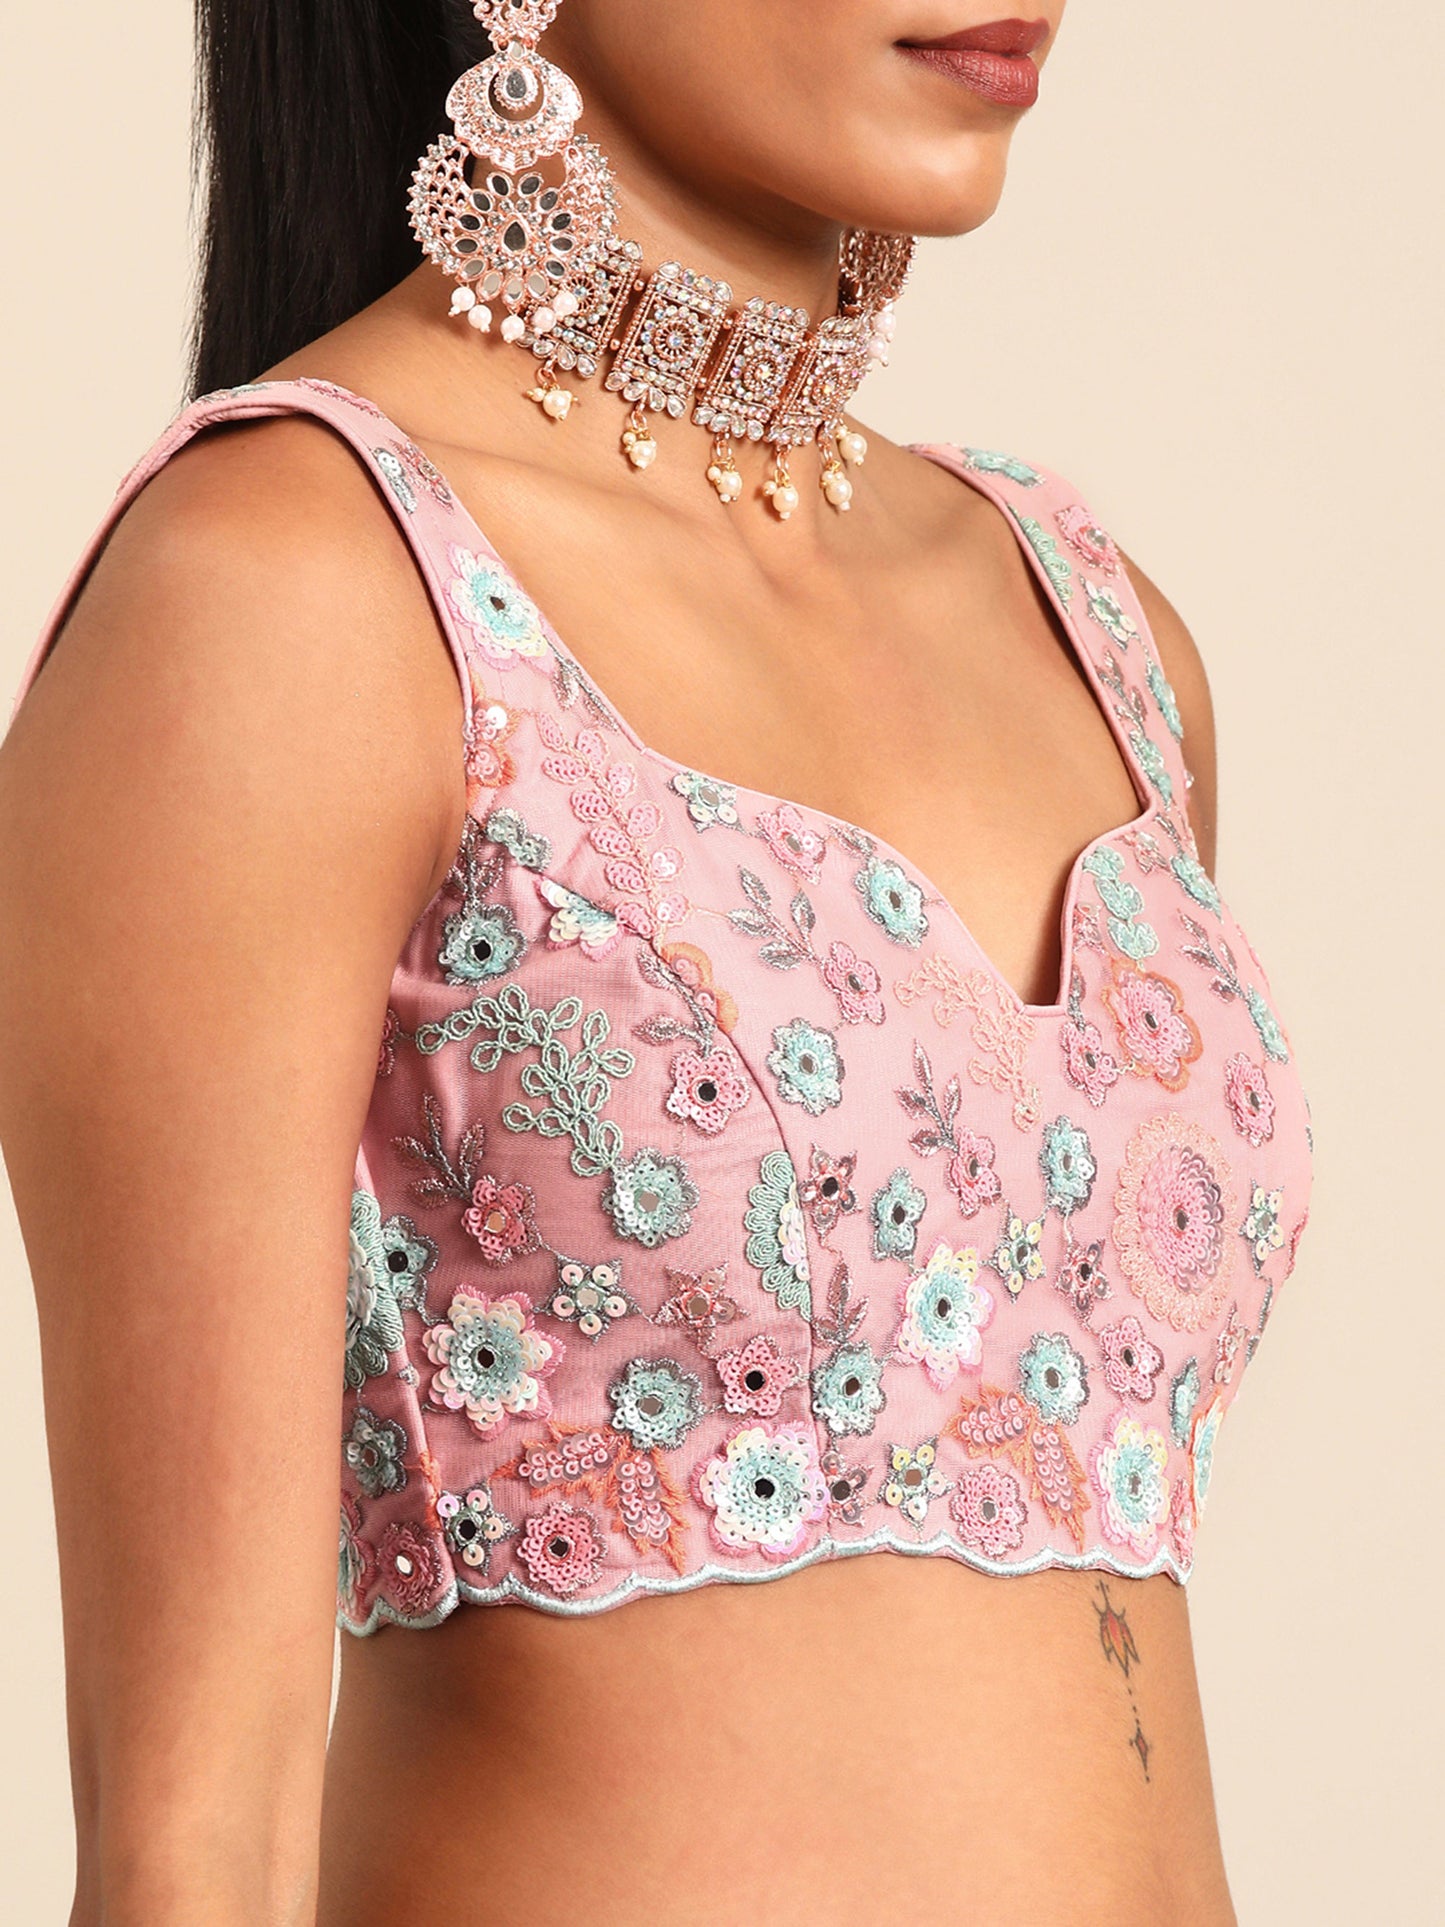 Pink Net Sequins, Mirror and thread embroidery Lehenga